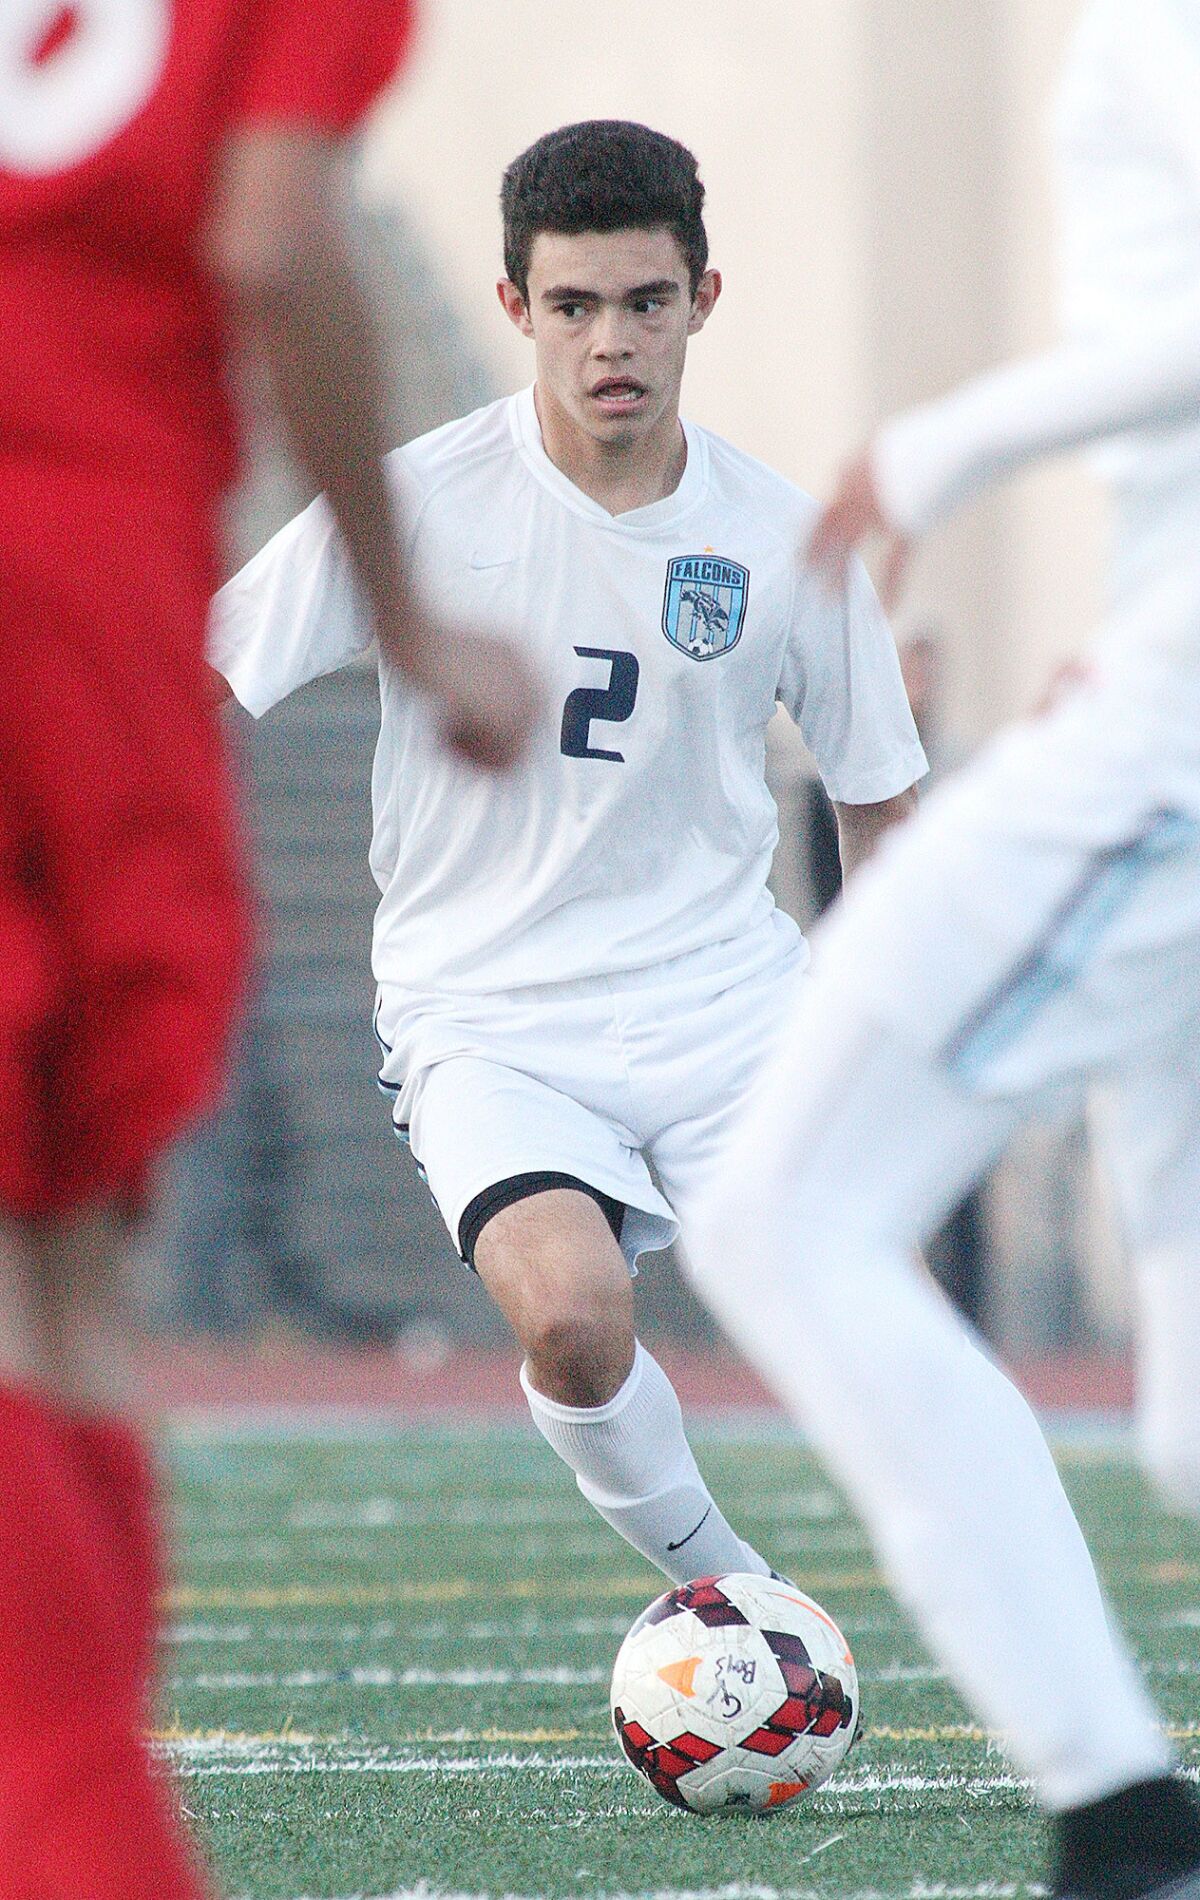 Plenty of Pacific League honors to go around in boys' soccer